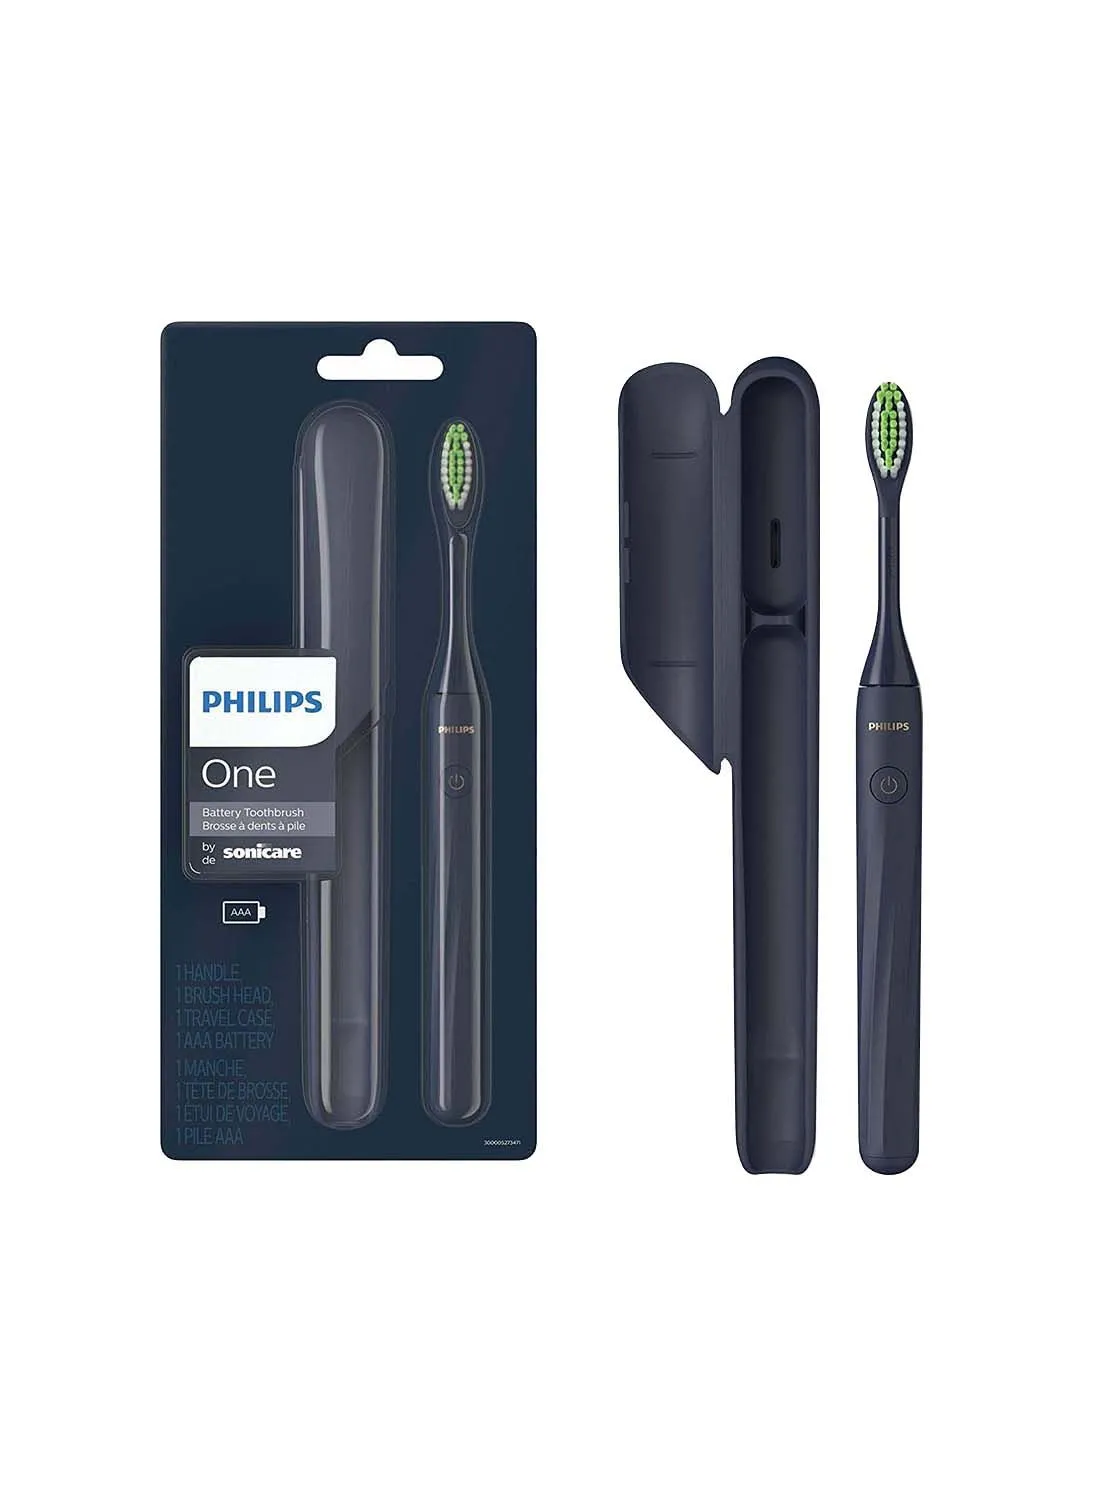 PHILIPS SONICARE One Battery Toothbrush Midnight Blue